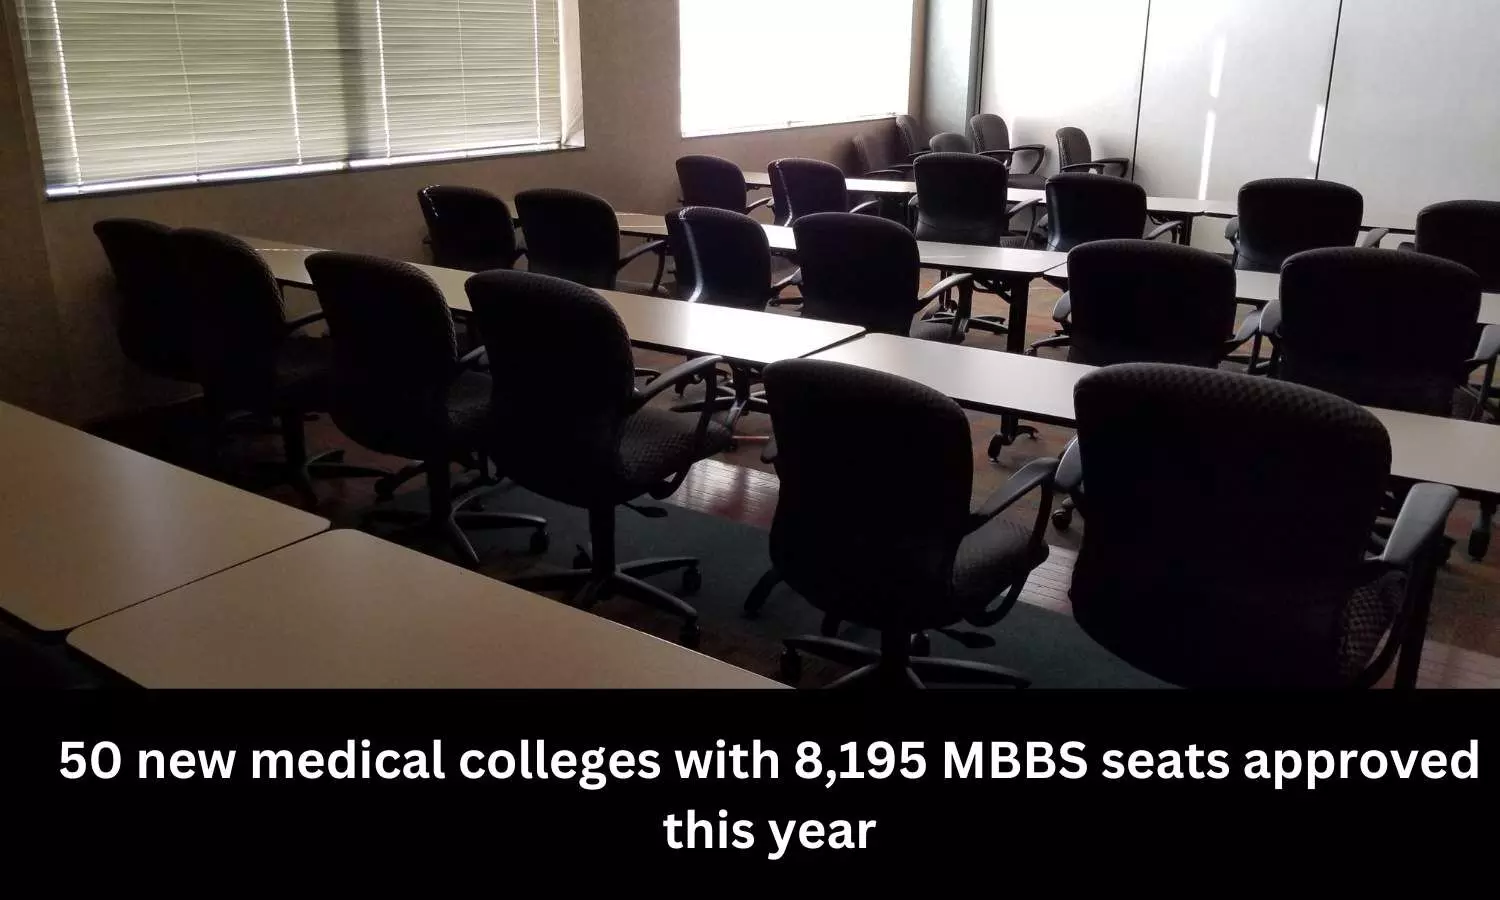 50 new medical colleges approved this year with intake capacity of 8,195 MBBS seats